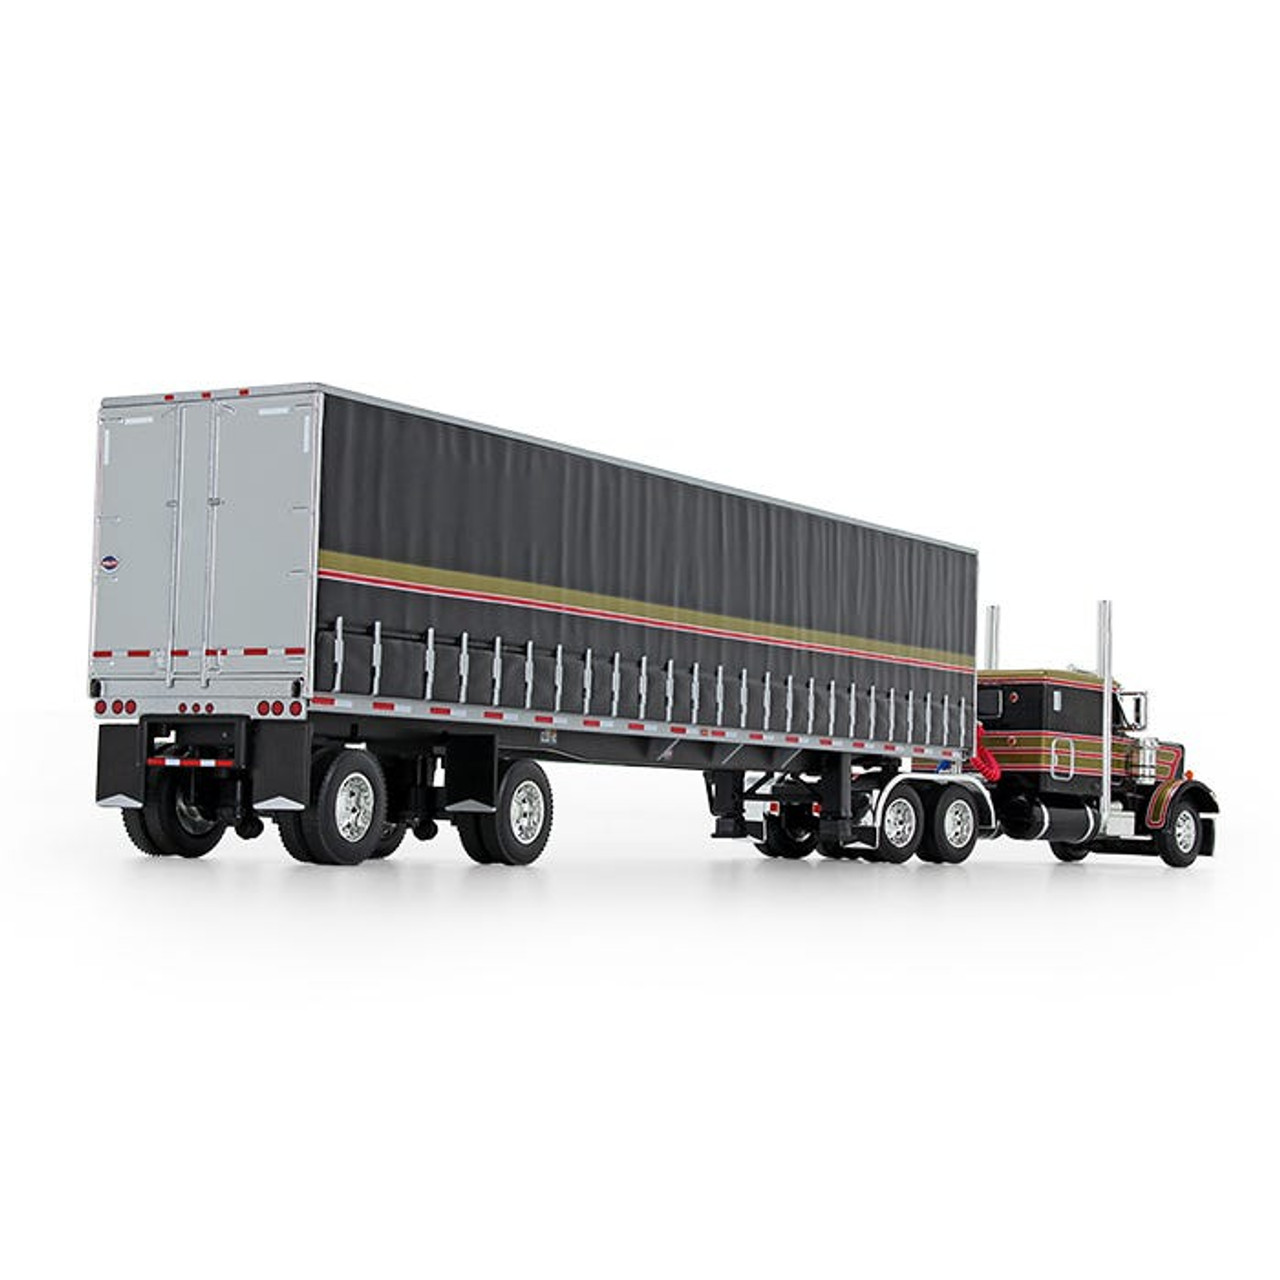 First Gear 60-0753 Peterbilt 359 with 63 Flattop Sleeper Cab with 53 ft. Utility Tautliner Spread-Axle Trailer Black with Gold & Red Stripes 1-64 Diecast Model